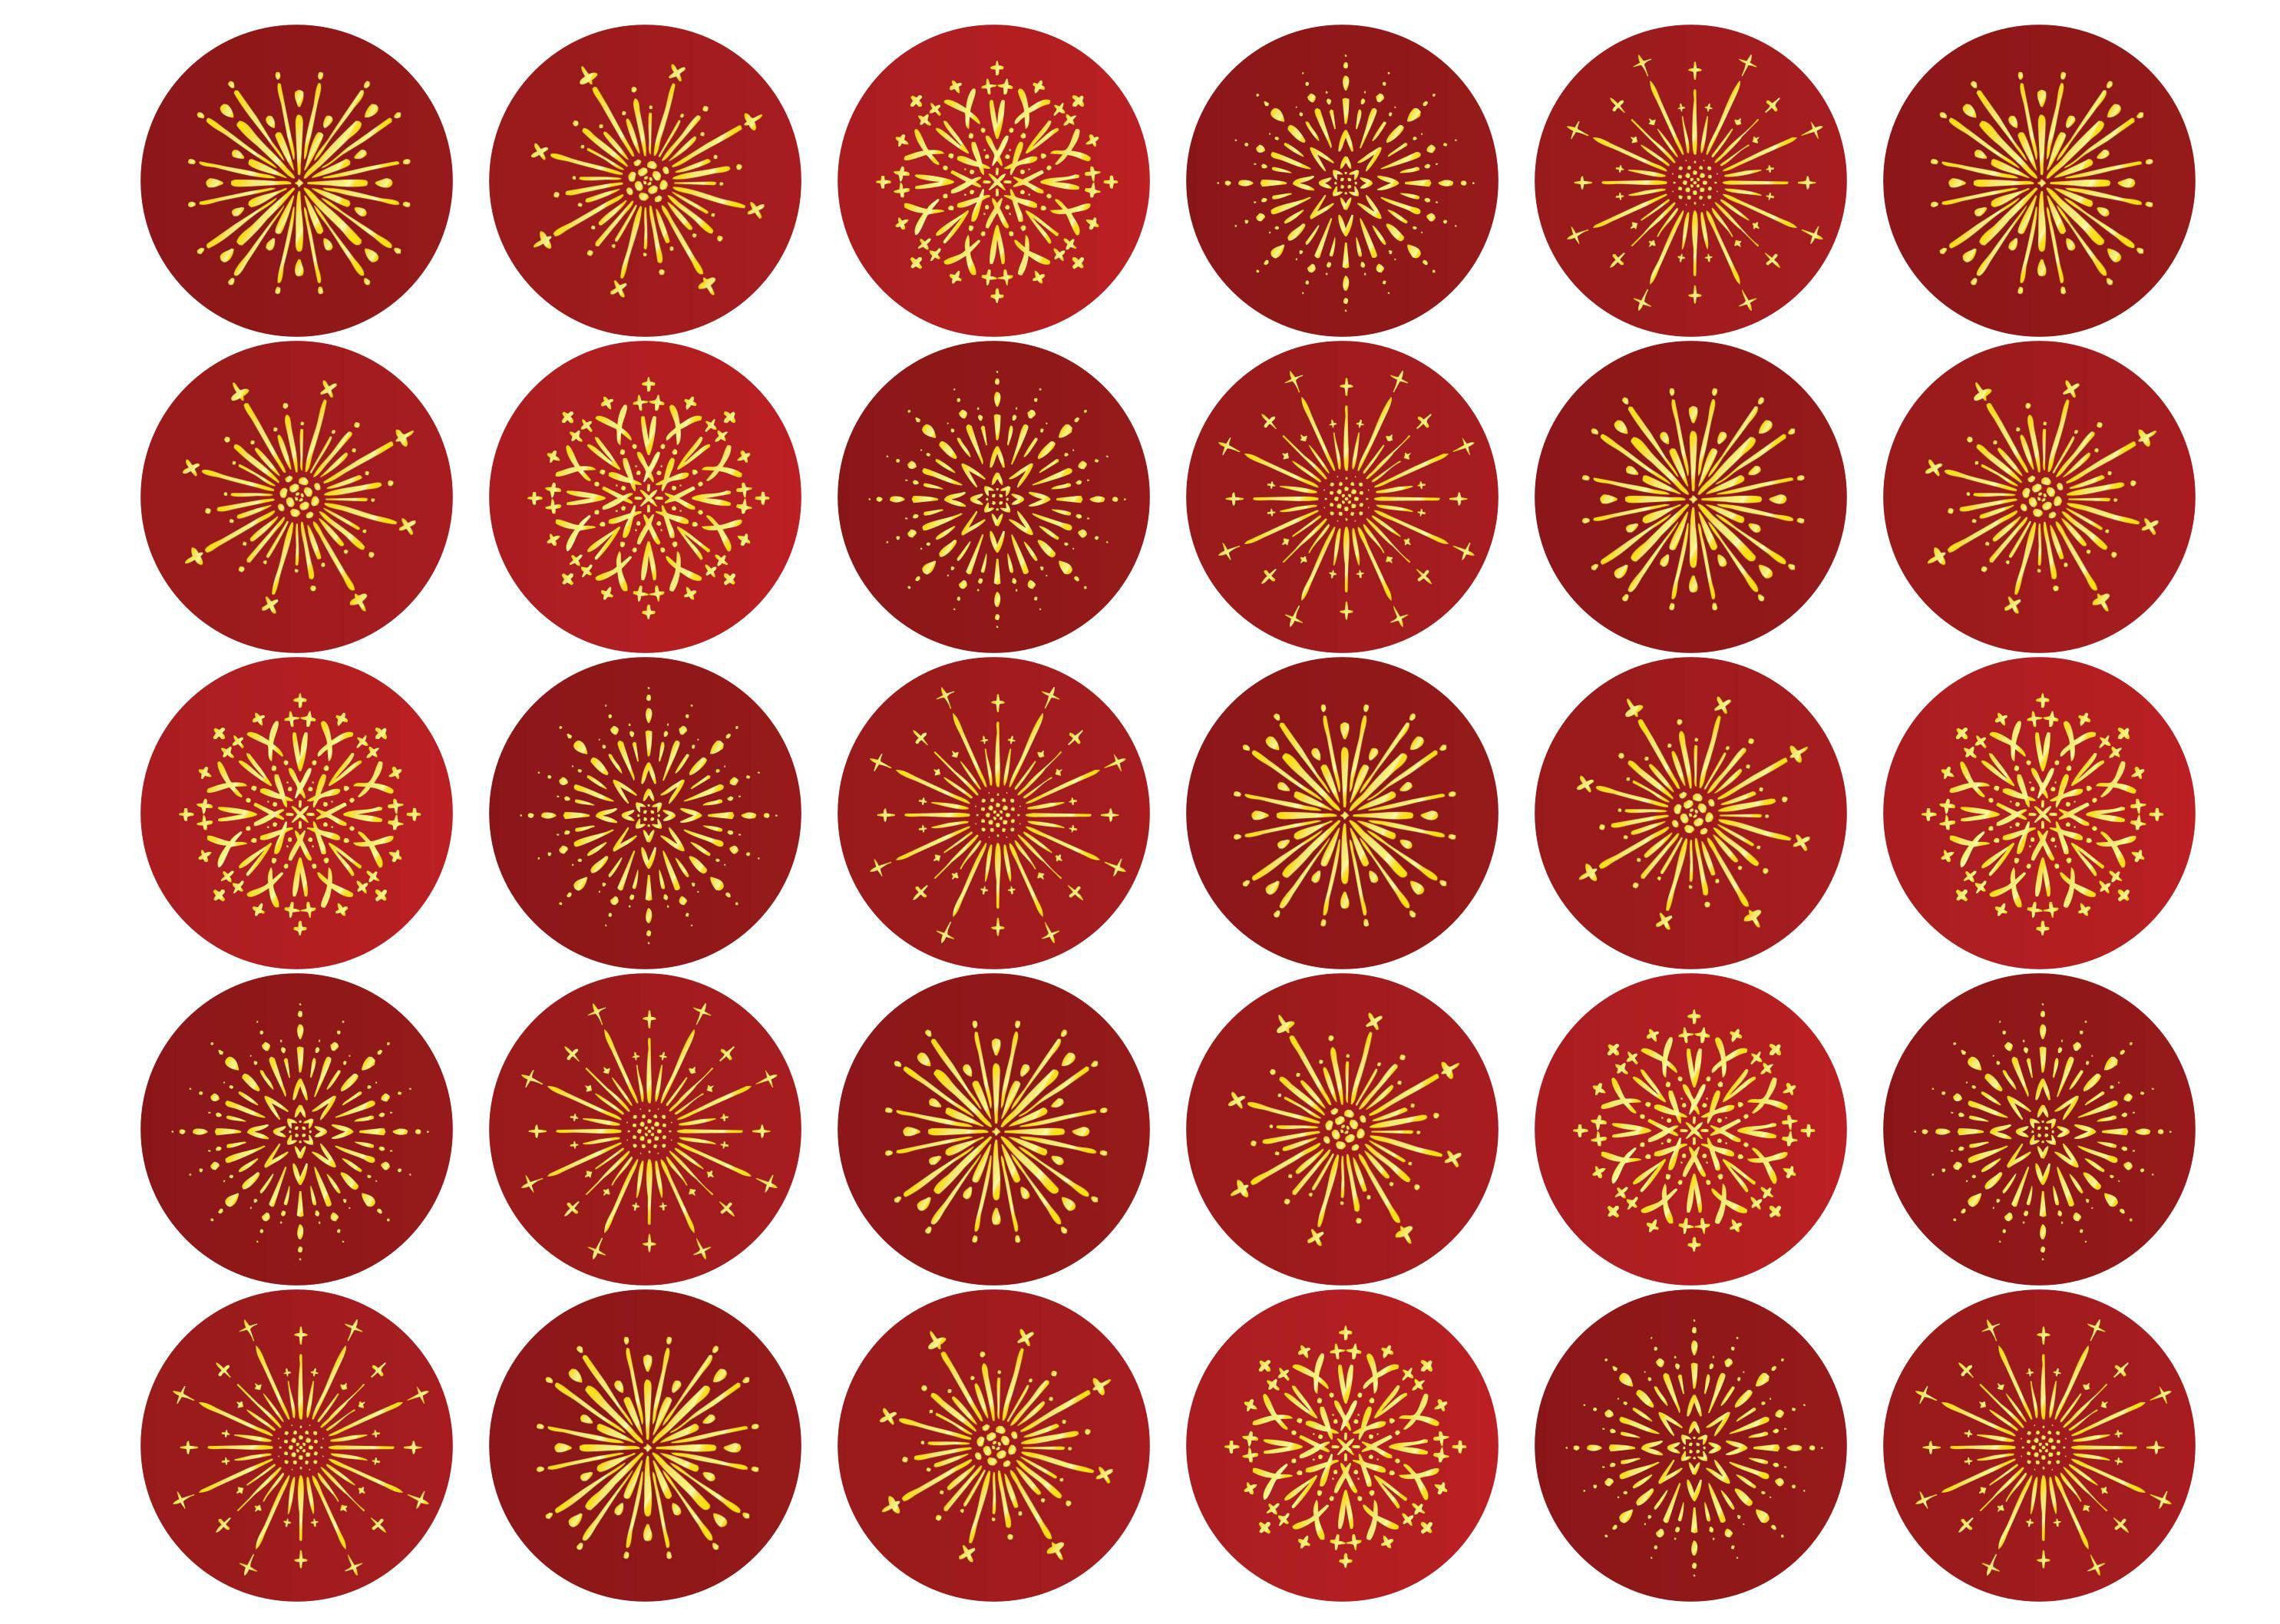 30 edible toppers with red and gold fireworks for the Chinese New Year